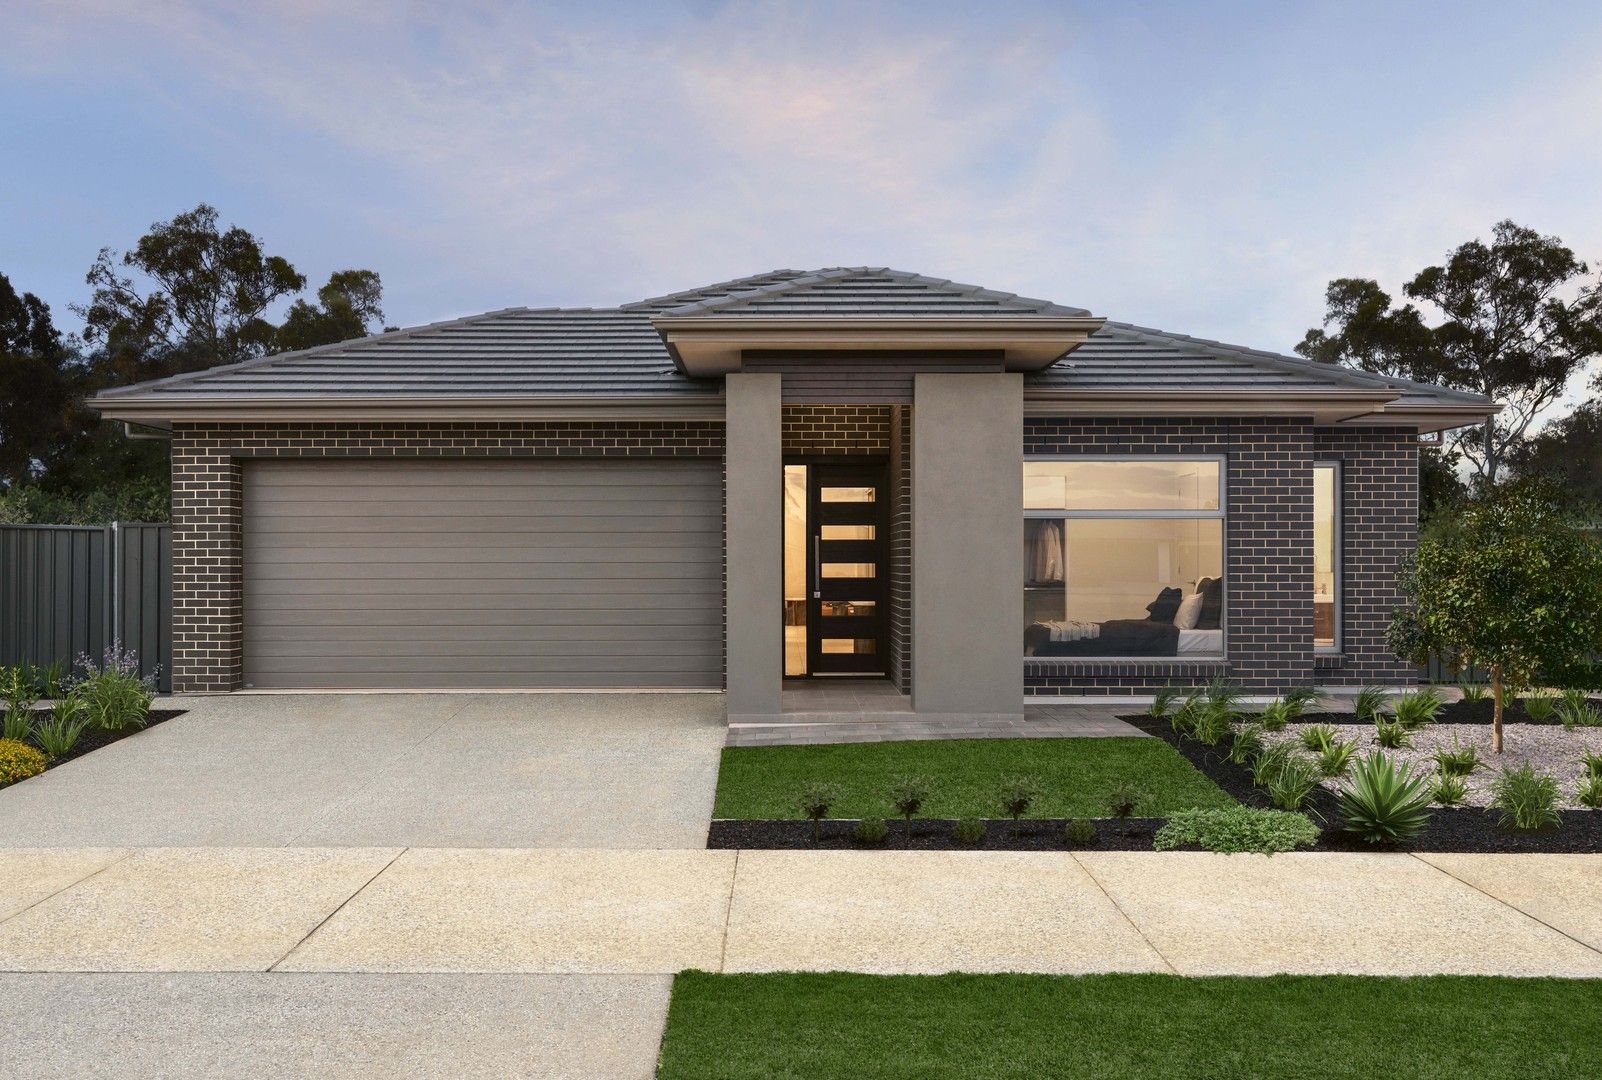 4 bedrooms New House & Land in Lot 4008 Carter Road GAWLER EAST SA, 5118